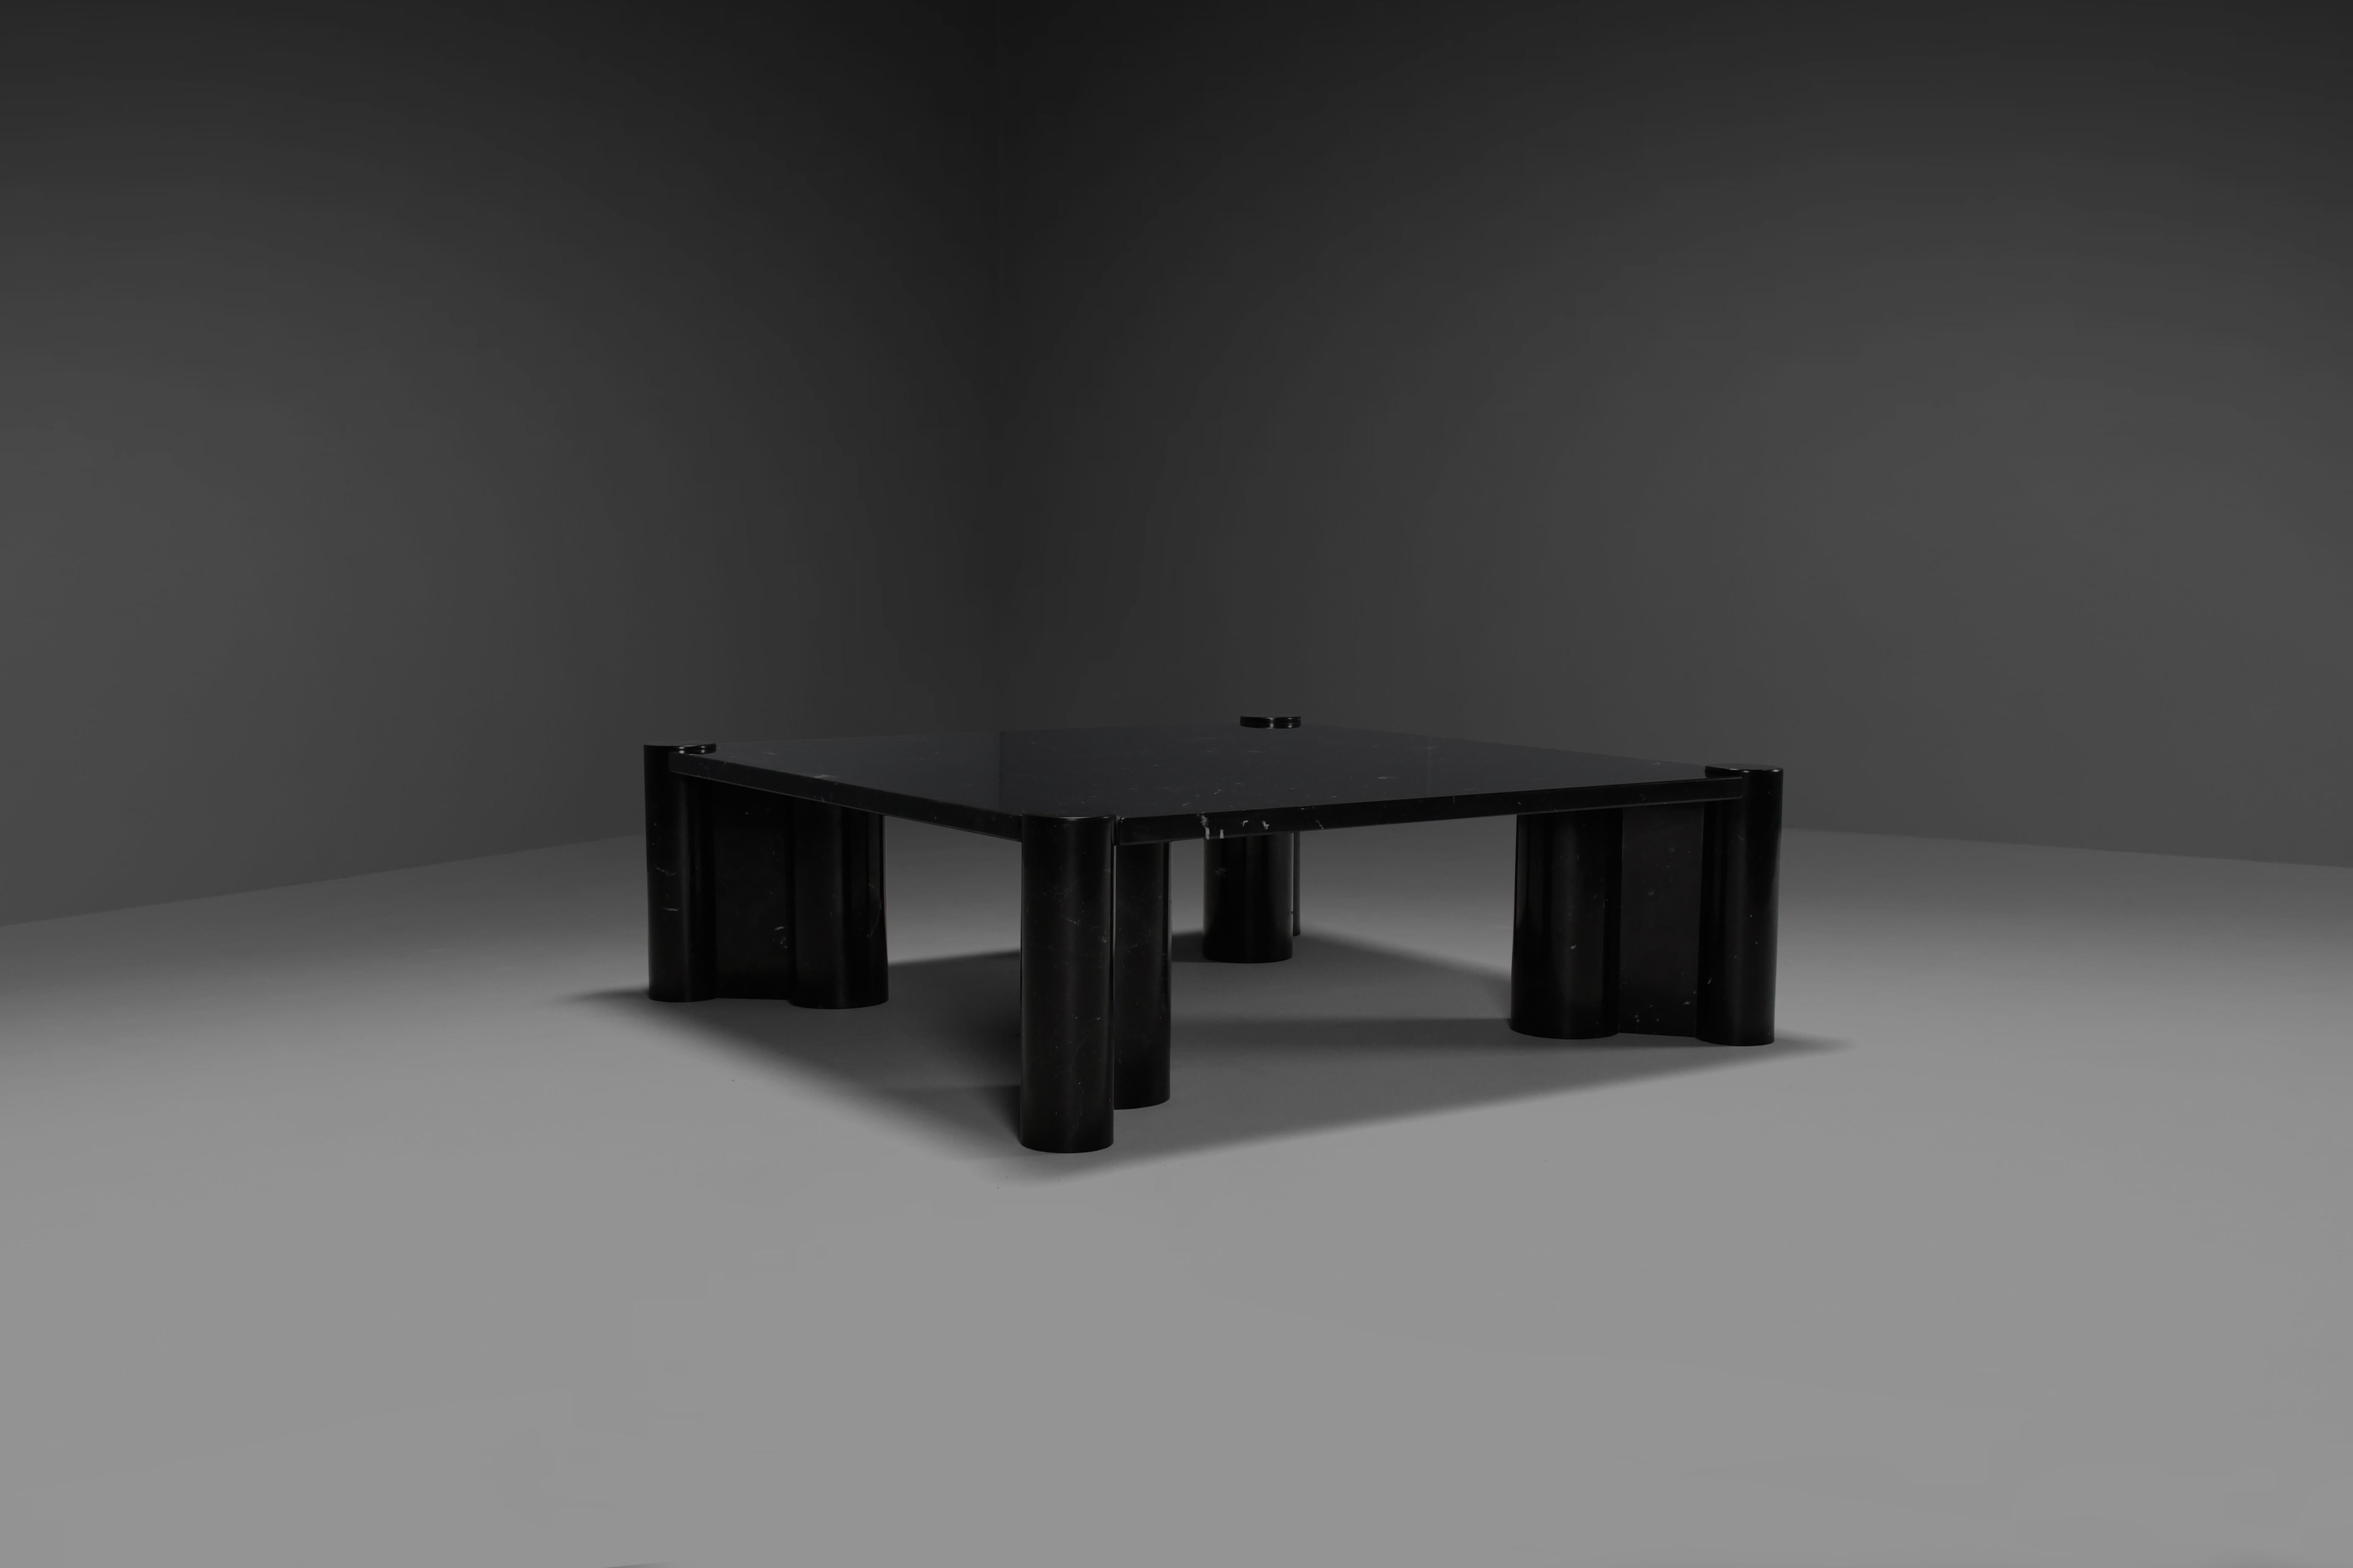 Impressive Jumbo coffee table in very good condition.

Designed by Gae Aulenti in the 1960s.

Manufactured by Knoll International.

This particular table is made from Nero Marquina, Marquina marble has a deep black color with subtle white